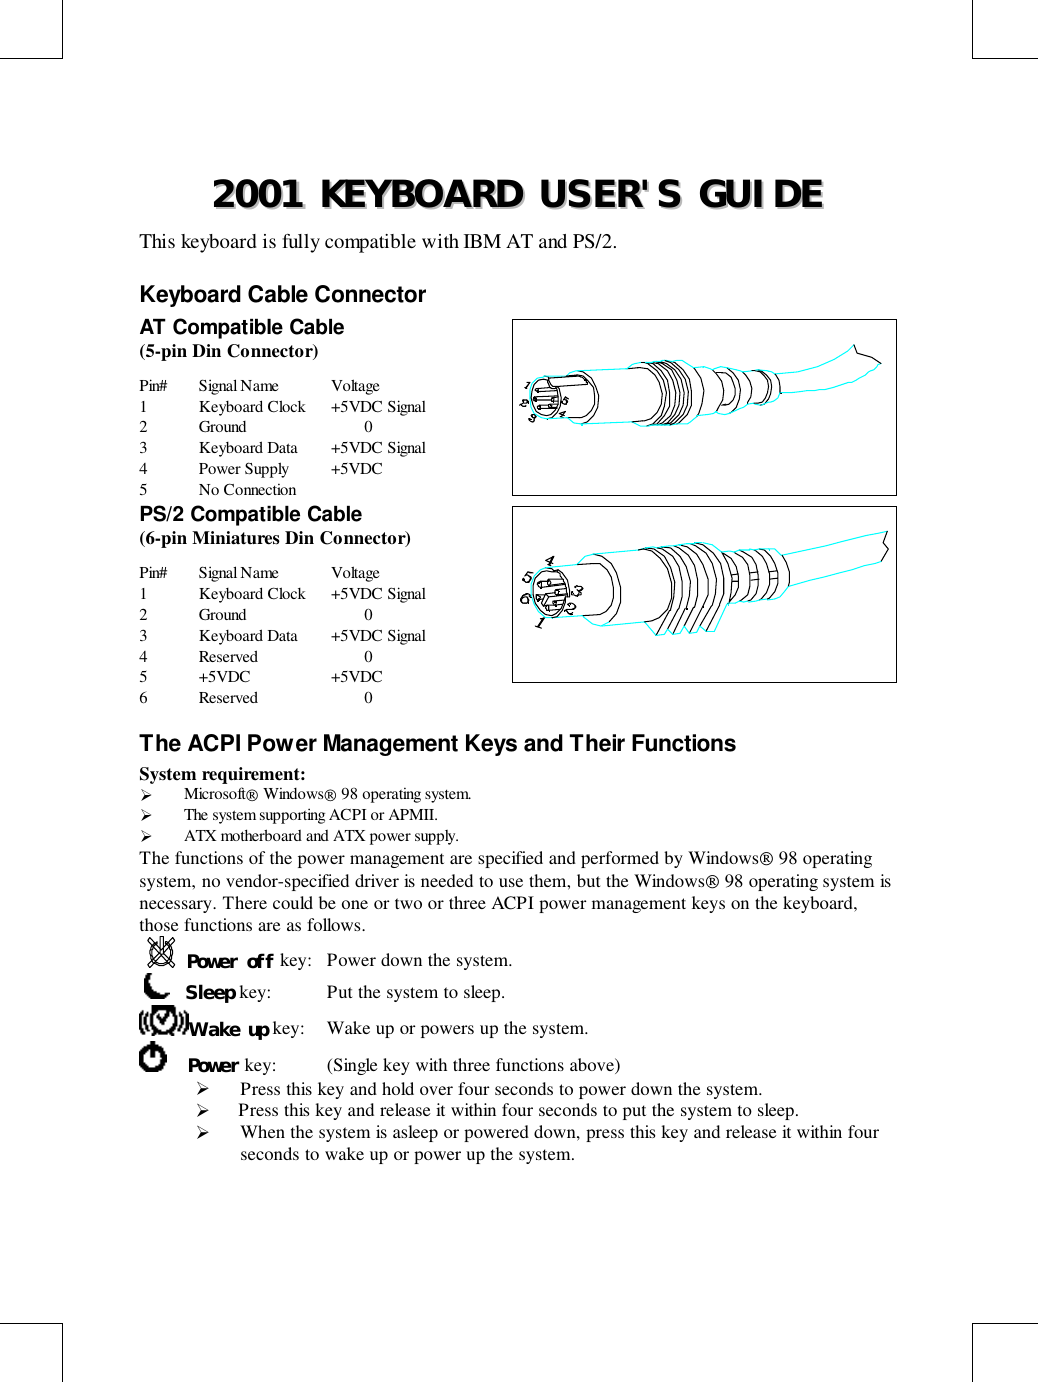 22000011  KKEEYYBBOOAARRDD  UUSSEERR&apos;&apos;SS  GGUUIIDDEEThis keyboard is fully compatible with IBM AT and PS/2.Keyboard Cable ConnectorAT Compatible Cable(5-pin Din Connector)Pin# Signal Name Voltage1 Keyboard Clock +5VDC Signal2 Ground 03 Keyboard Data +5VDC Signal4 Power Supply +5VDC5 No ConnectionPS/2 Compatible Cable(6-pin Miniatures Din Connector)Pin# Signal Name Voltage1 Keyboard Clock +5VDC Signal2 Ground 03 Keyboard Data +5VDC Signal4 Reserved 05 +5VDC +5VDC6 Reserved 0The ACPI Power Management Keys and Their FunctionsSystem requirement:! Microsoft Windows 98 operating system.! The system supporting ACPI or APMII.! ATX motherboard and ATX power supply.The functions of the power management are specified and performed by Windows 98 operatingsystem, no vendor-specified driver is needed to use them, but the Windows 98 operating system isnecessary. There could be one or two or three ACPI power management keys on the keyboard,those functions are as follows.Power off key: Power down the system.    Sleep key: Put the system to sleep.Wake up key: Wake up or powers up the system.    Power key: (Single key with three functions above)! Press this key and hold over four seconds to power down the system.!  Press this key and release it within four seconds to put the system to sleep.! When the system is asleep or powered down, press this key and release it within fourseconds to wake up or power up the system.